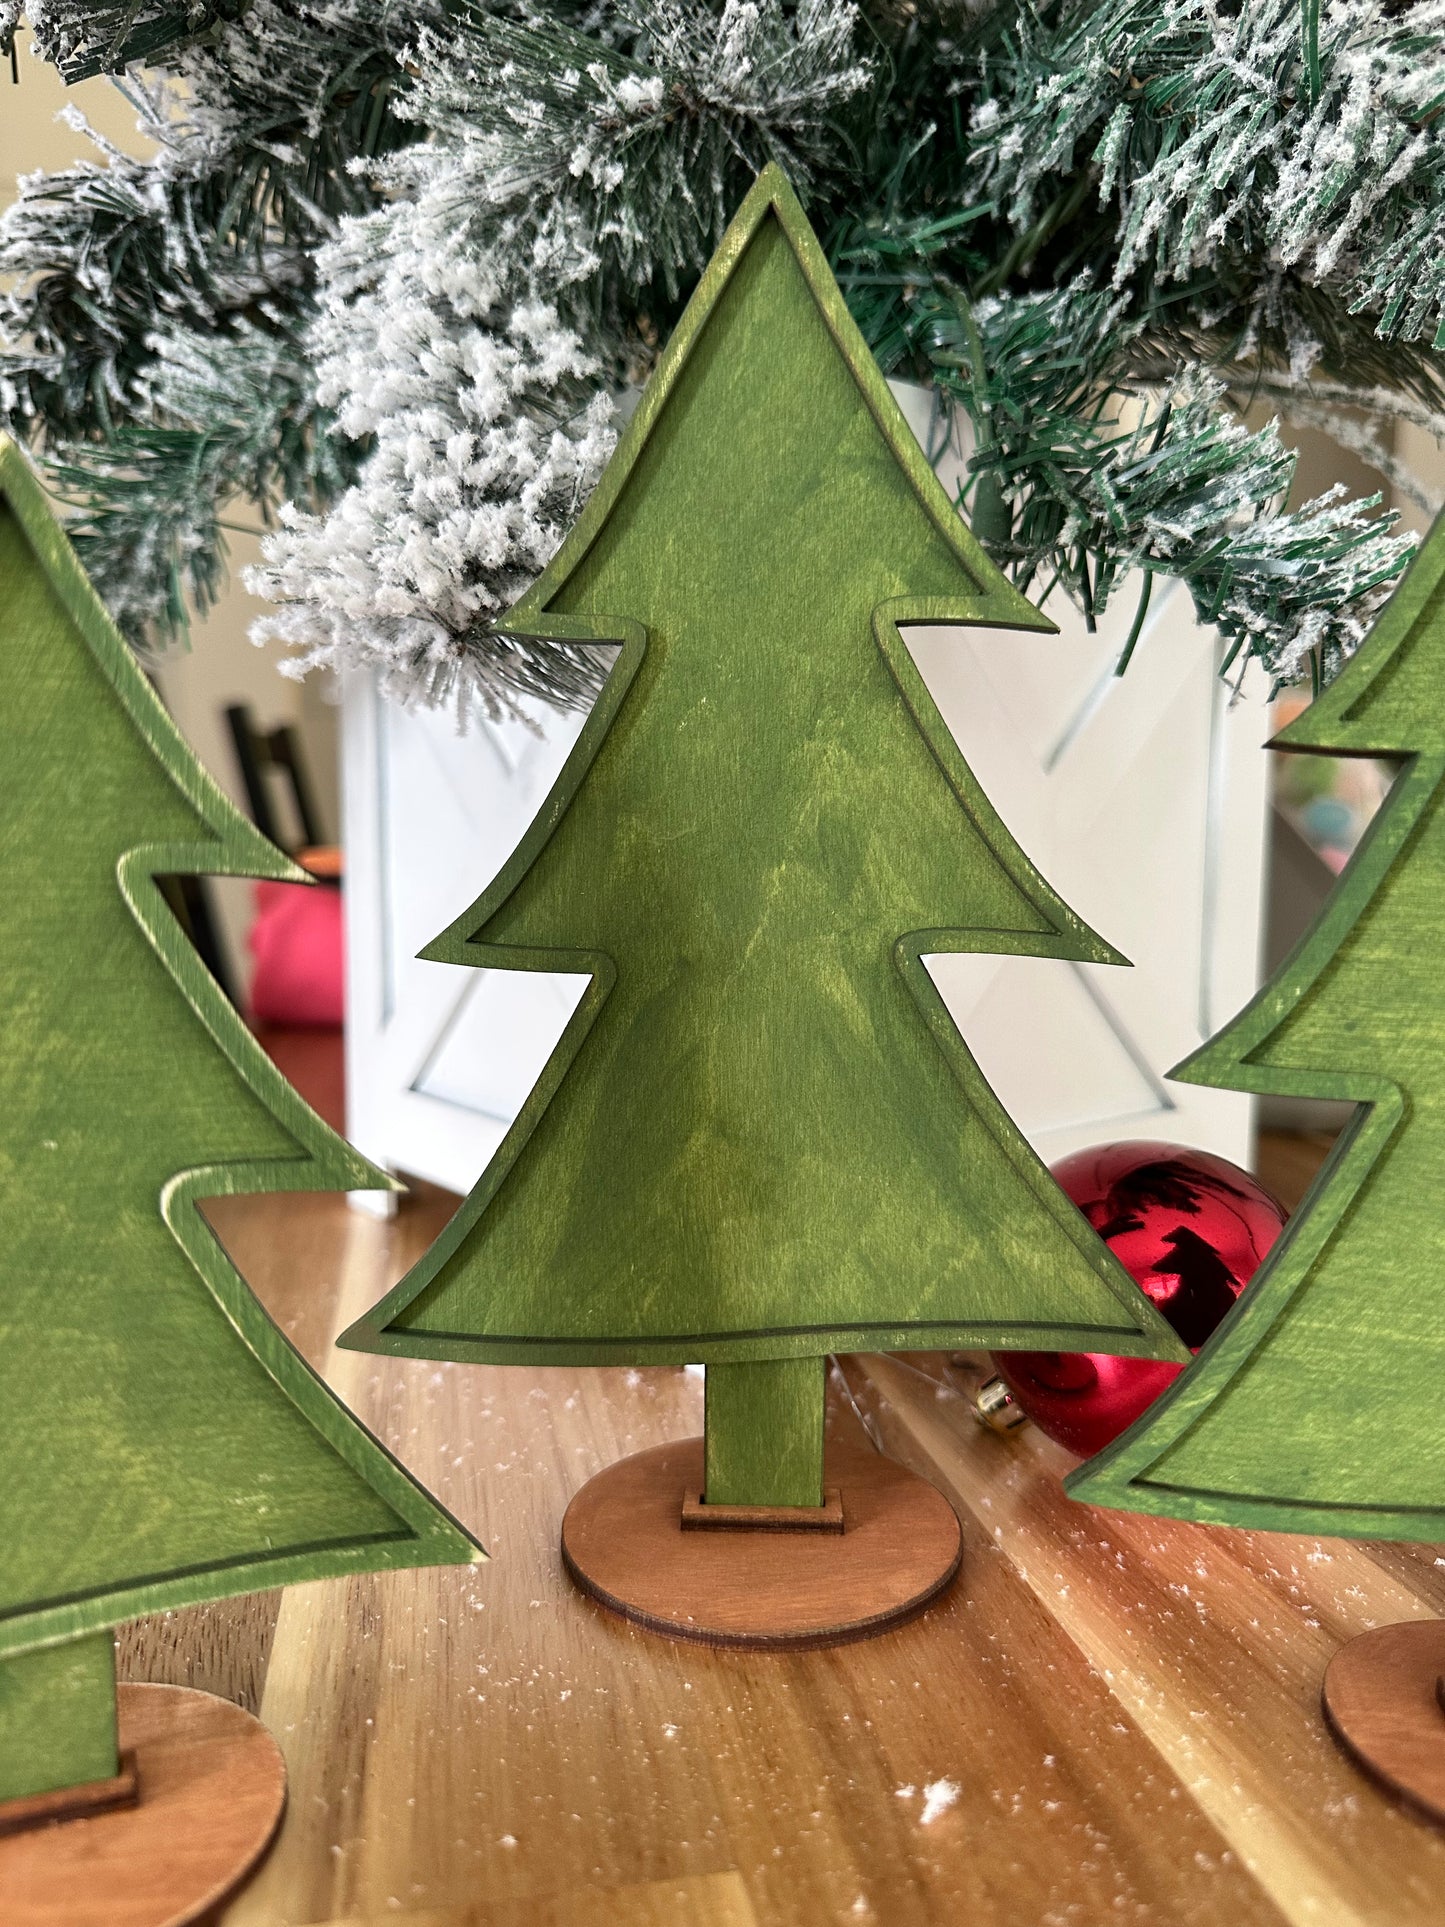 Set of 3 wooden Christmas Trees